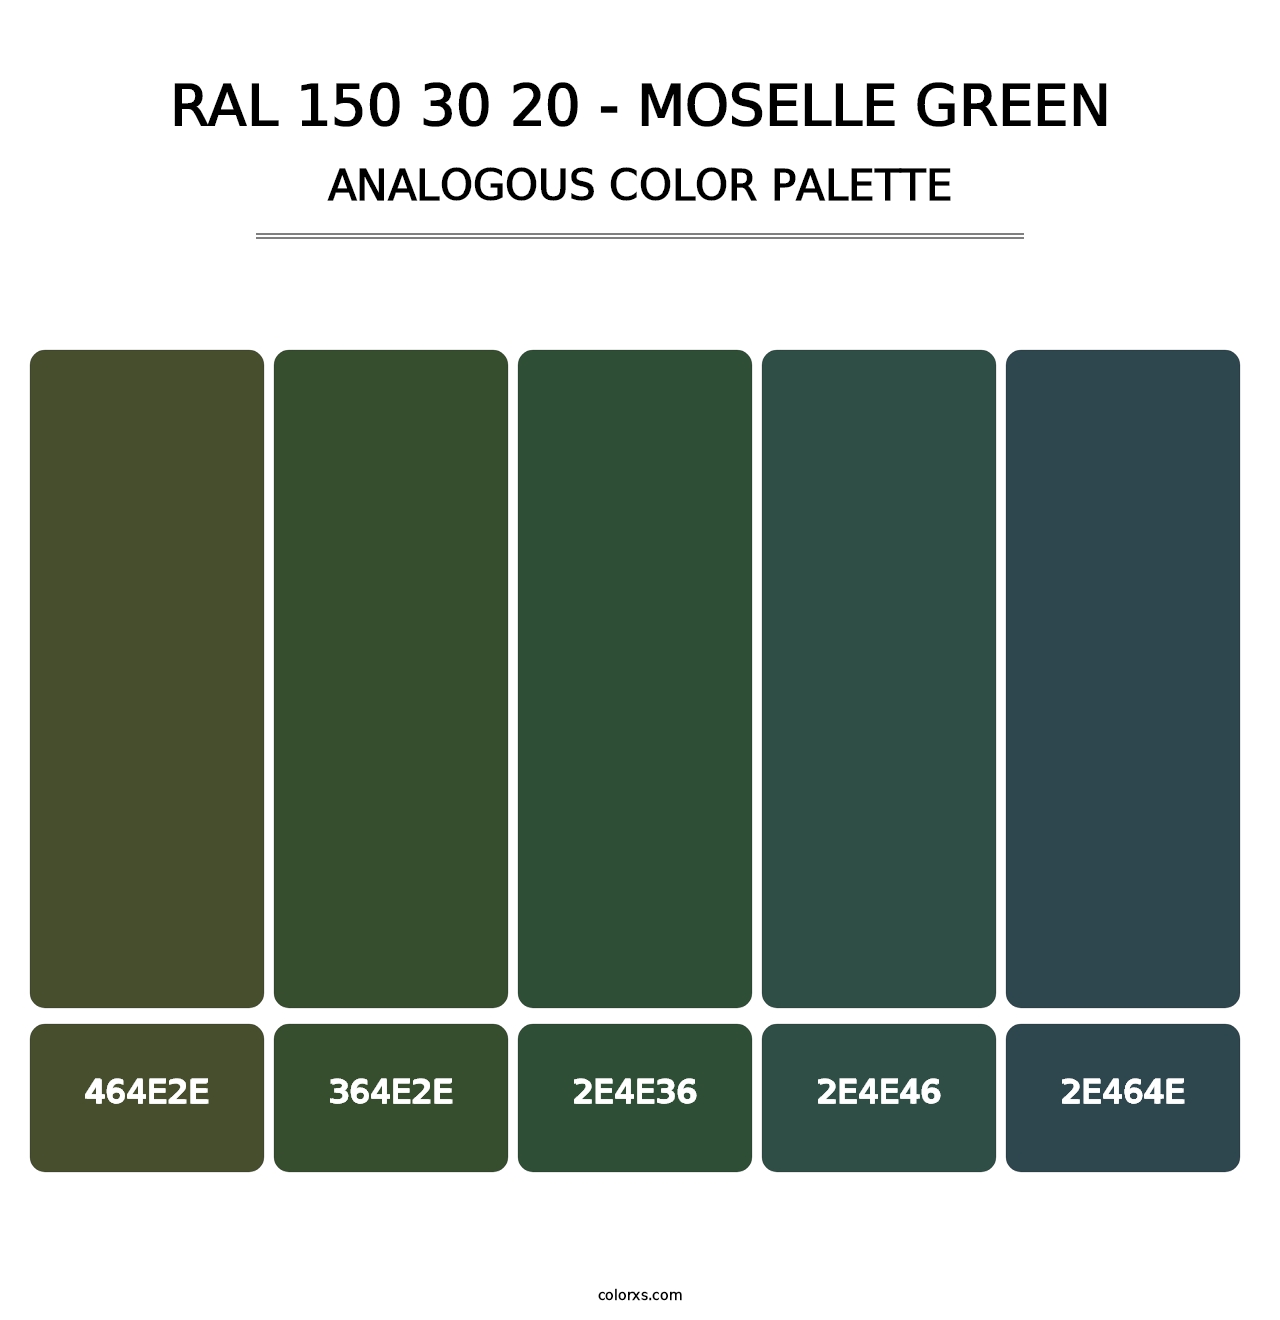 RAL 150 30 20 - Moselle Green - Analogous Color Palette